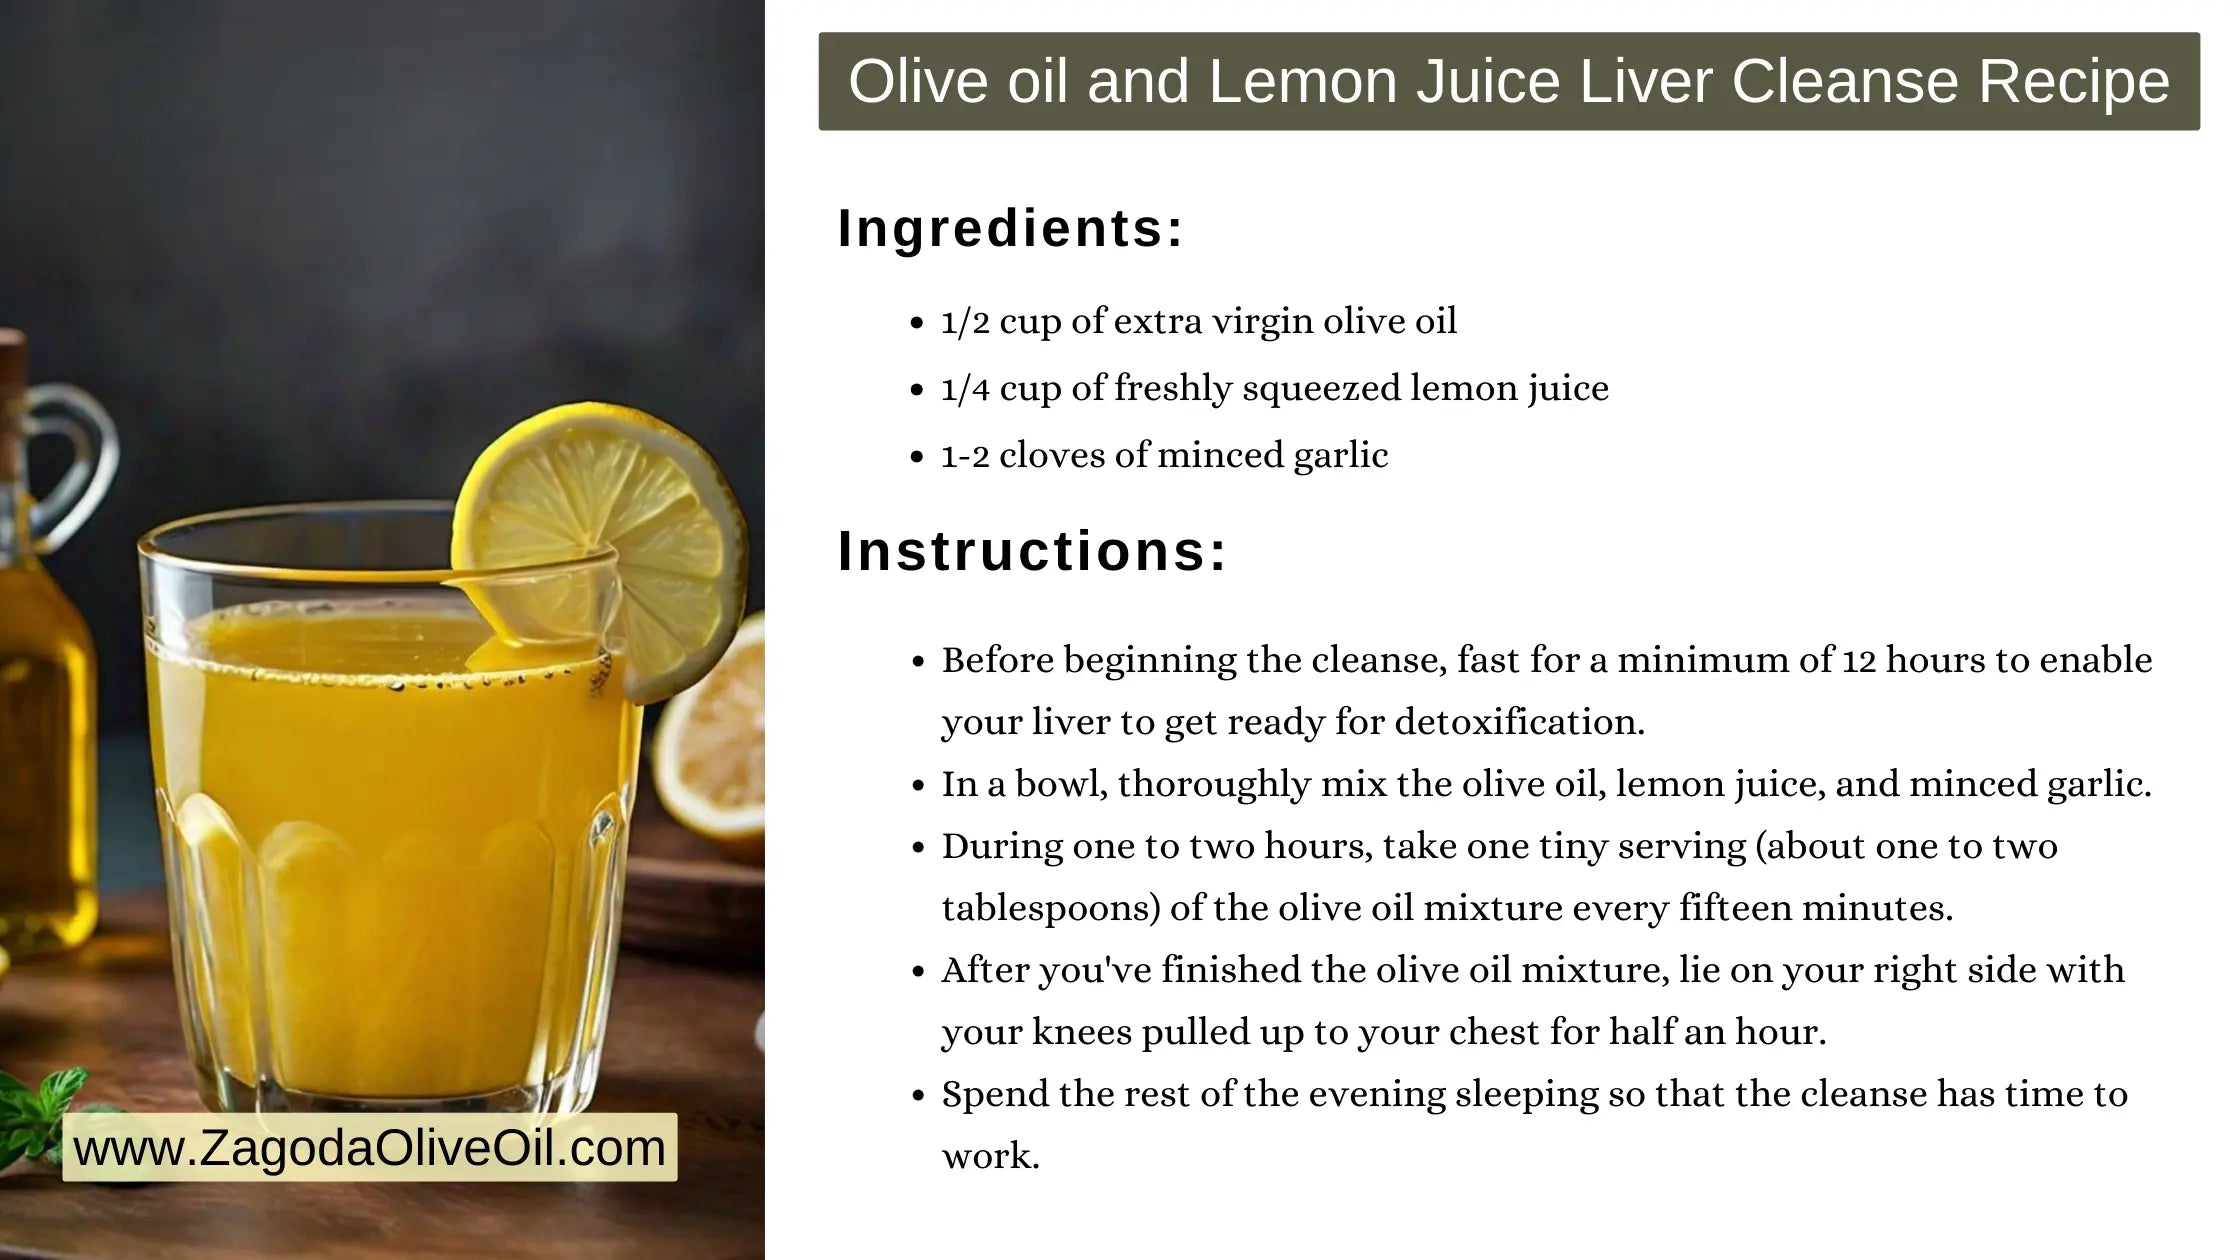 Recipe for olive oil and lemon juice liver cleanse recipe.